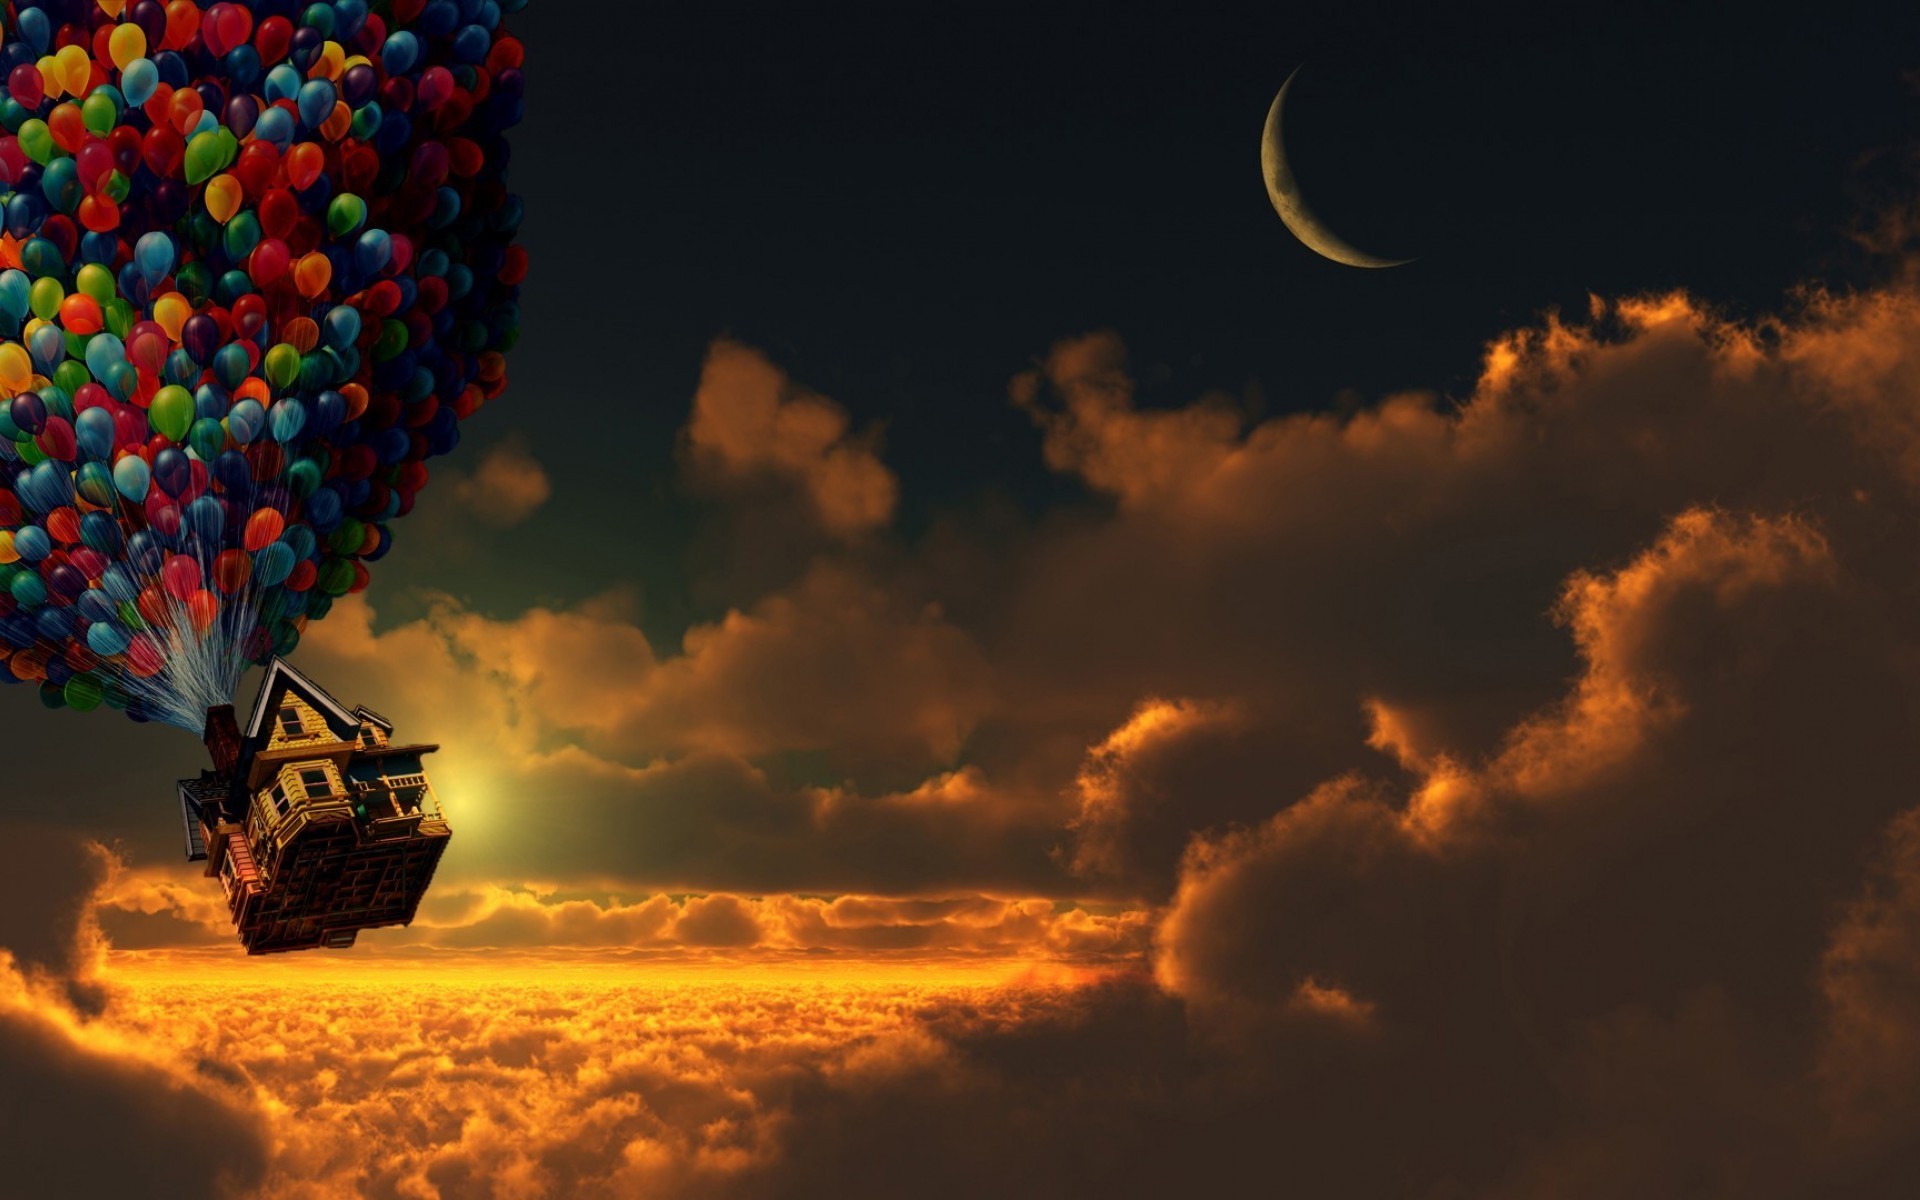 Up (movie), Sunset, Balloons, House, Moon, Crescent Moon, Clouds Wallpaper